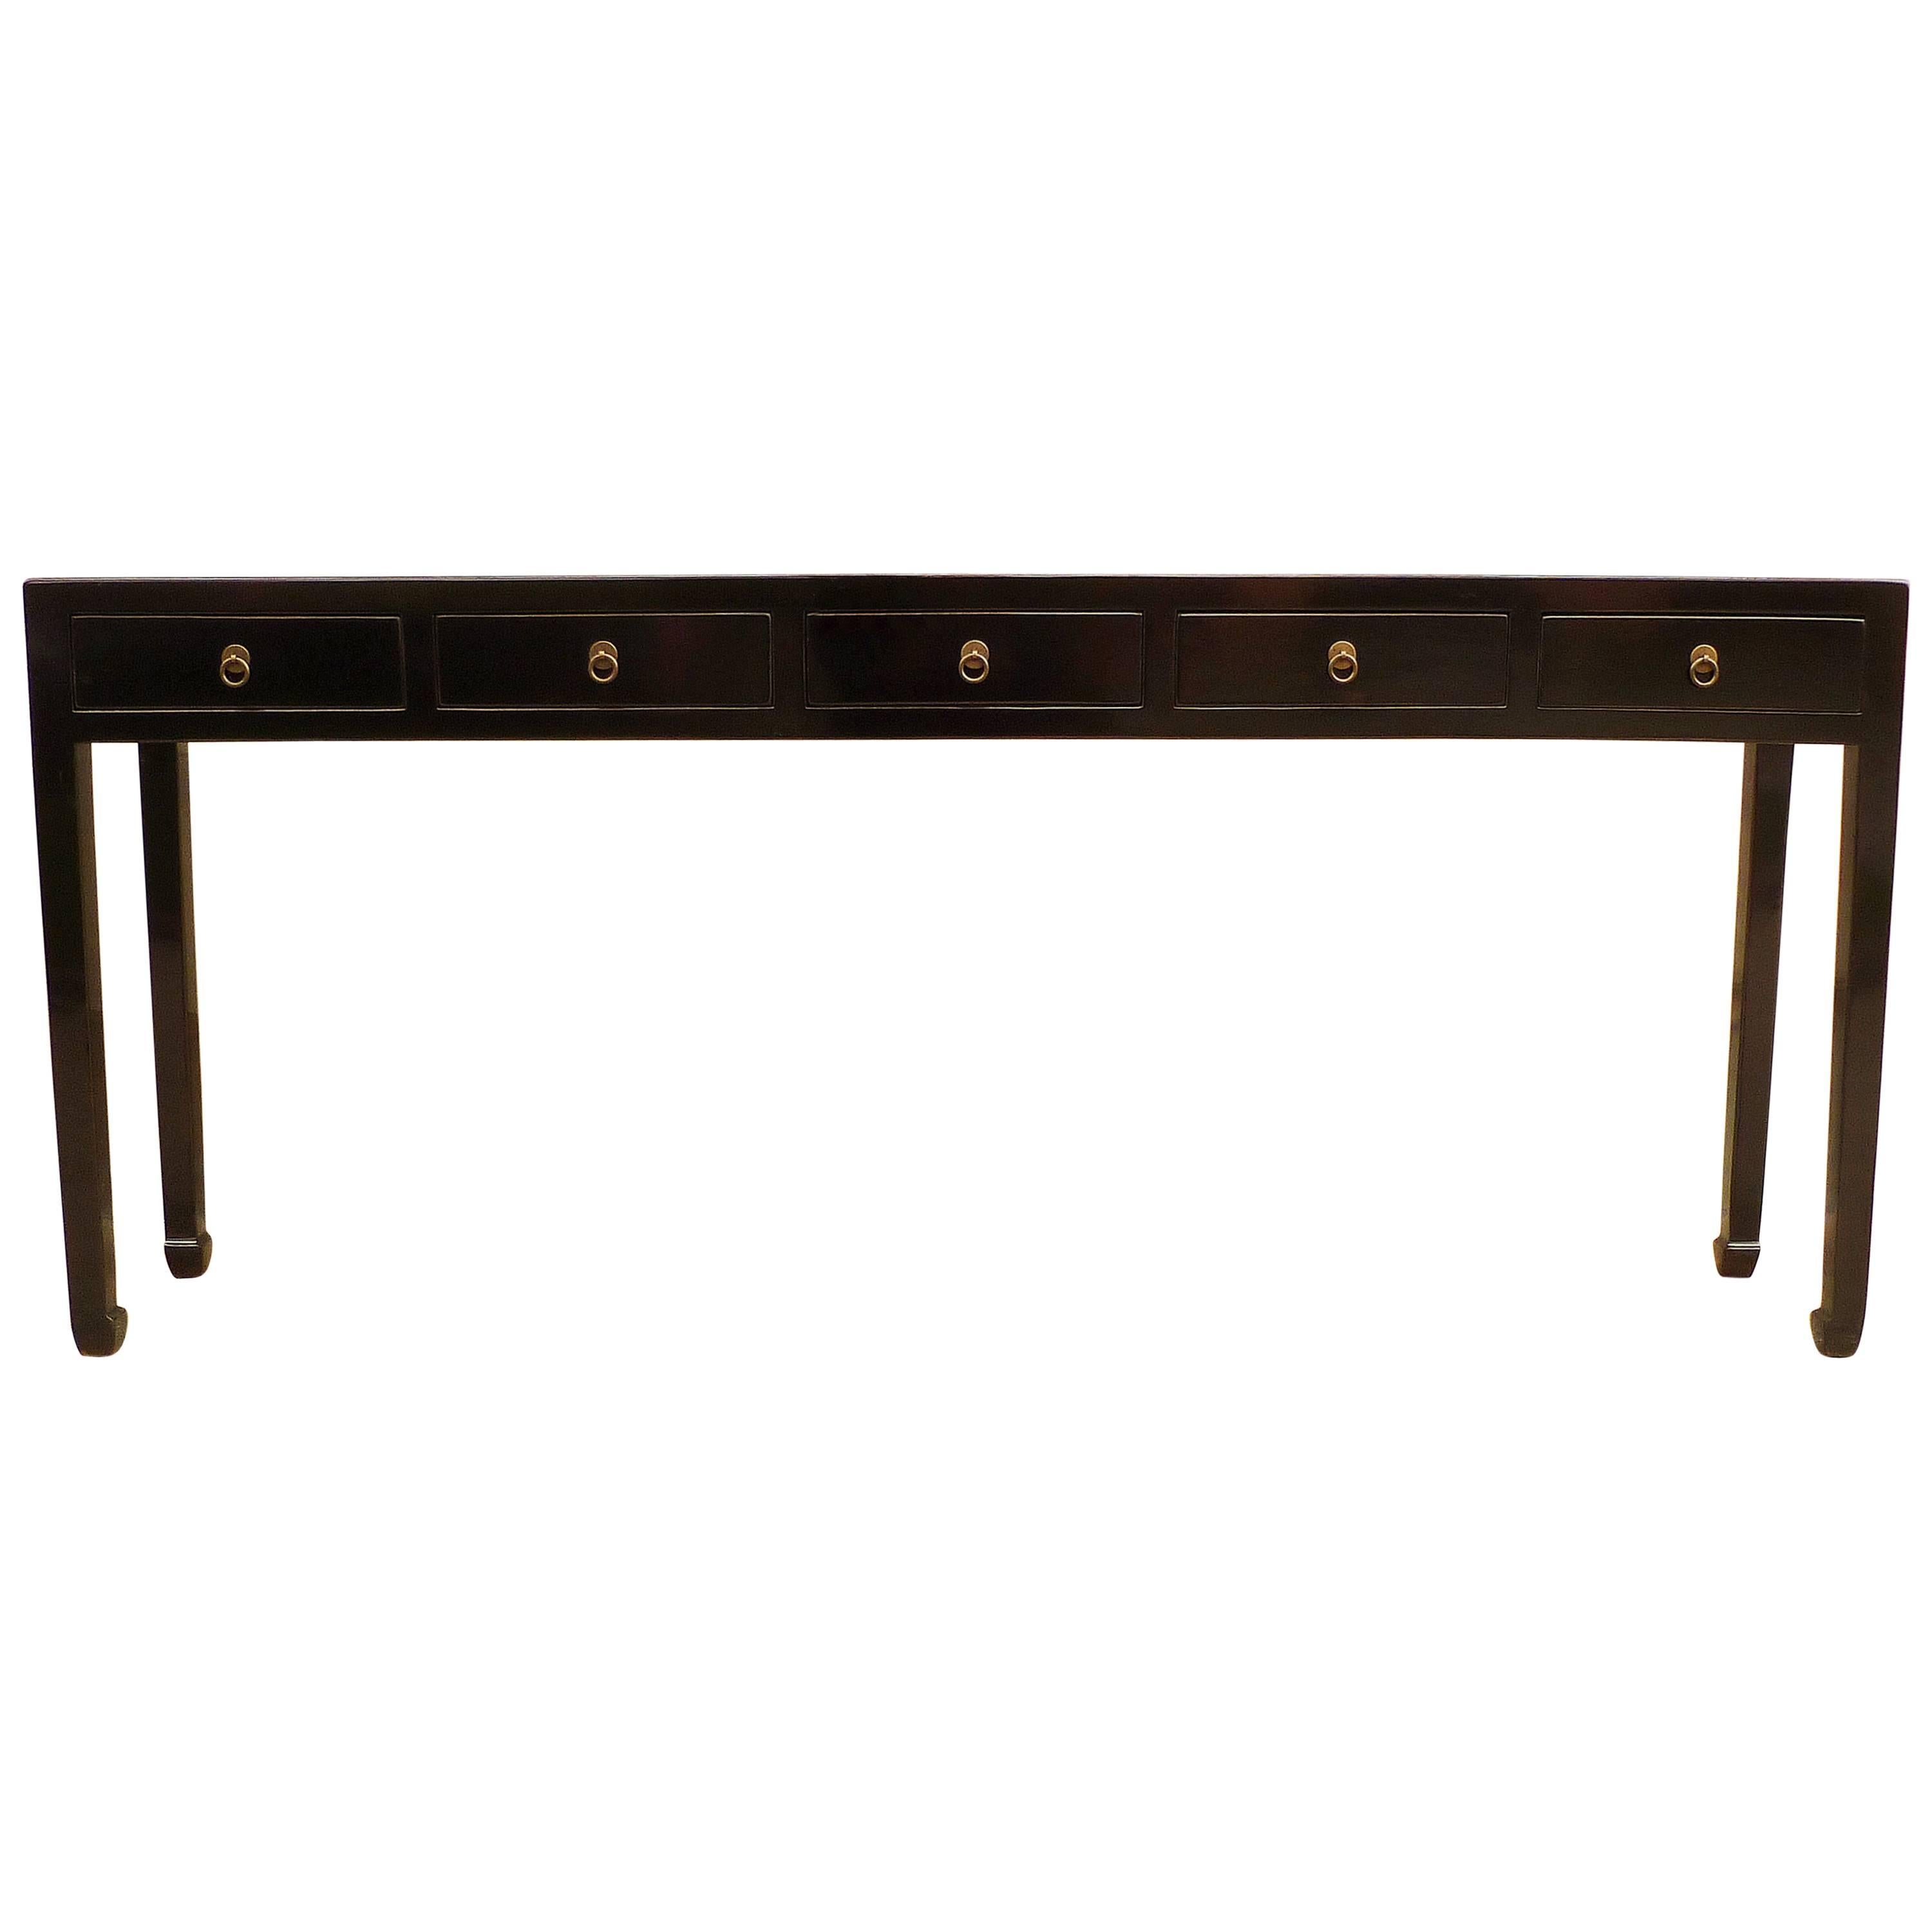 Fine Black Lacquer Console Table with Drawers